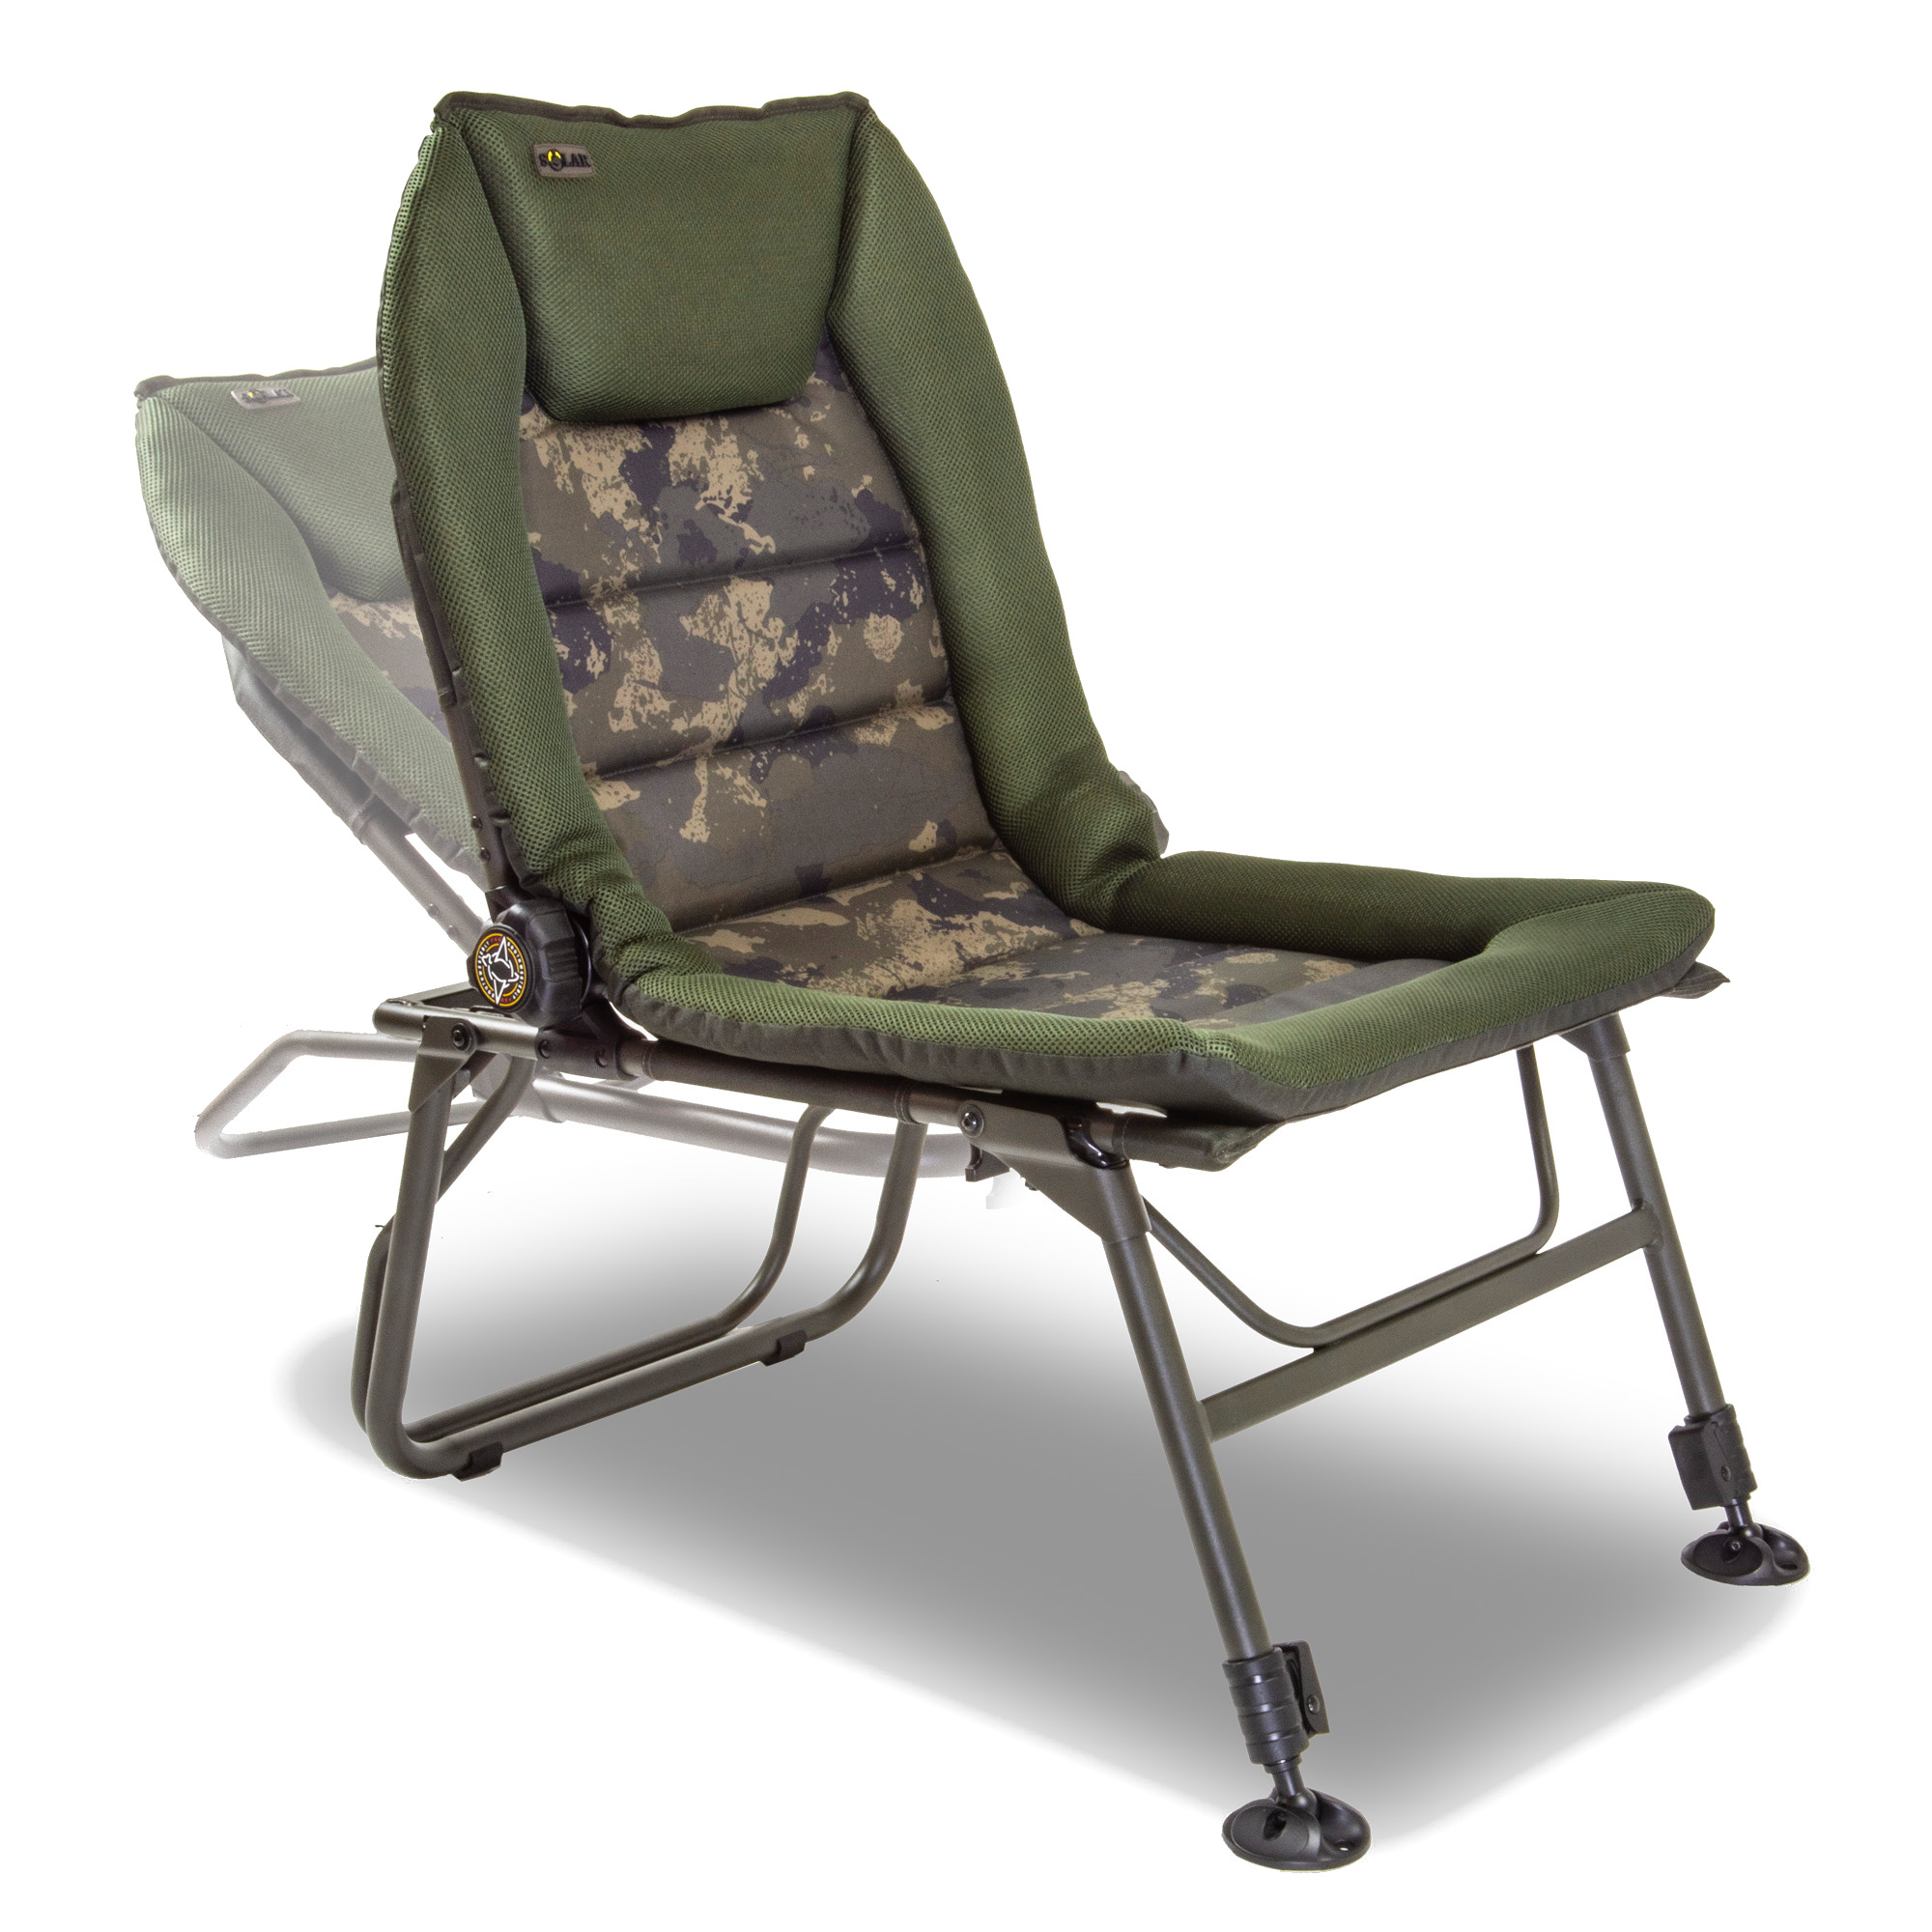 Solar South Westerly Pro Combi Chair Karpfen Stuhl (Bed-Fit & Recline)